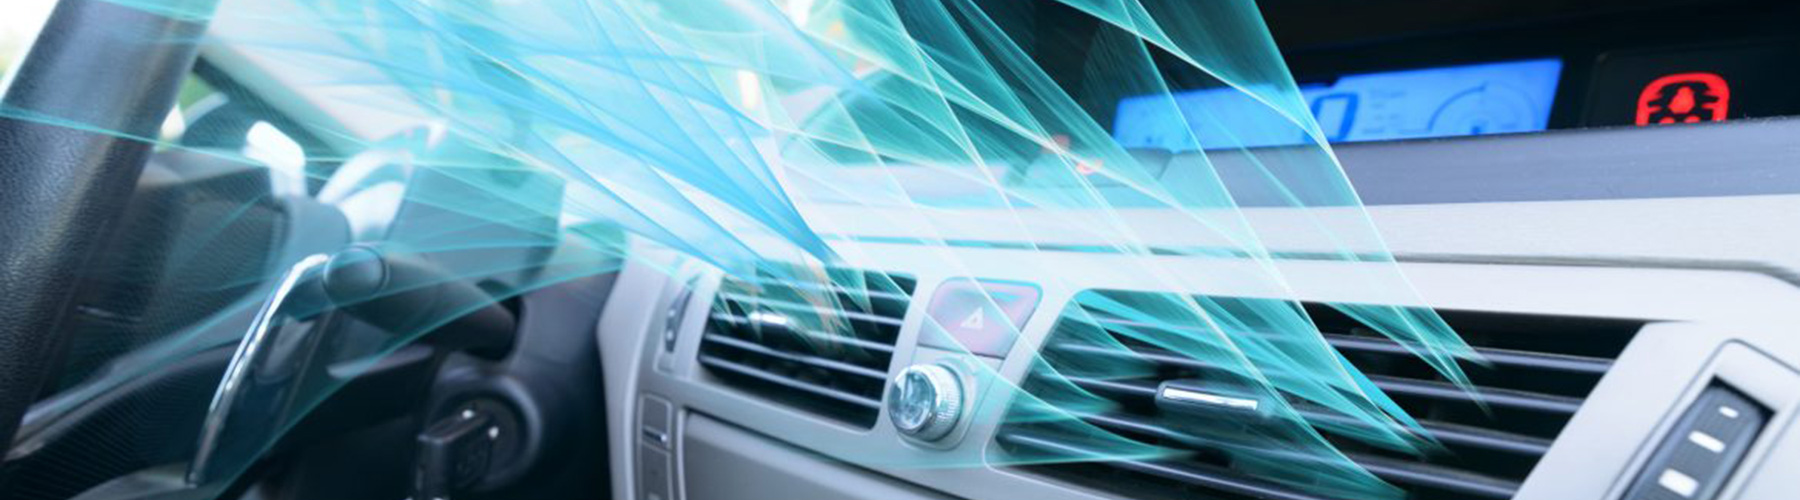 Car Air Conditioning Repair Near Me in Briarcliff Manor | Westchester